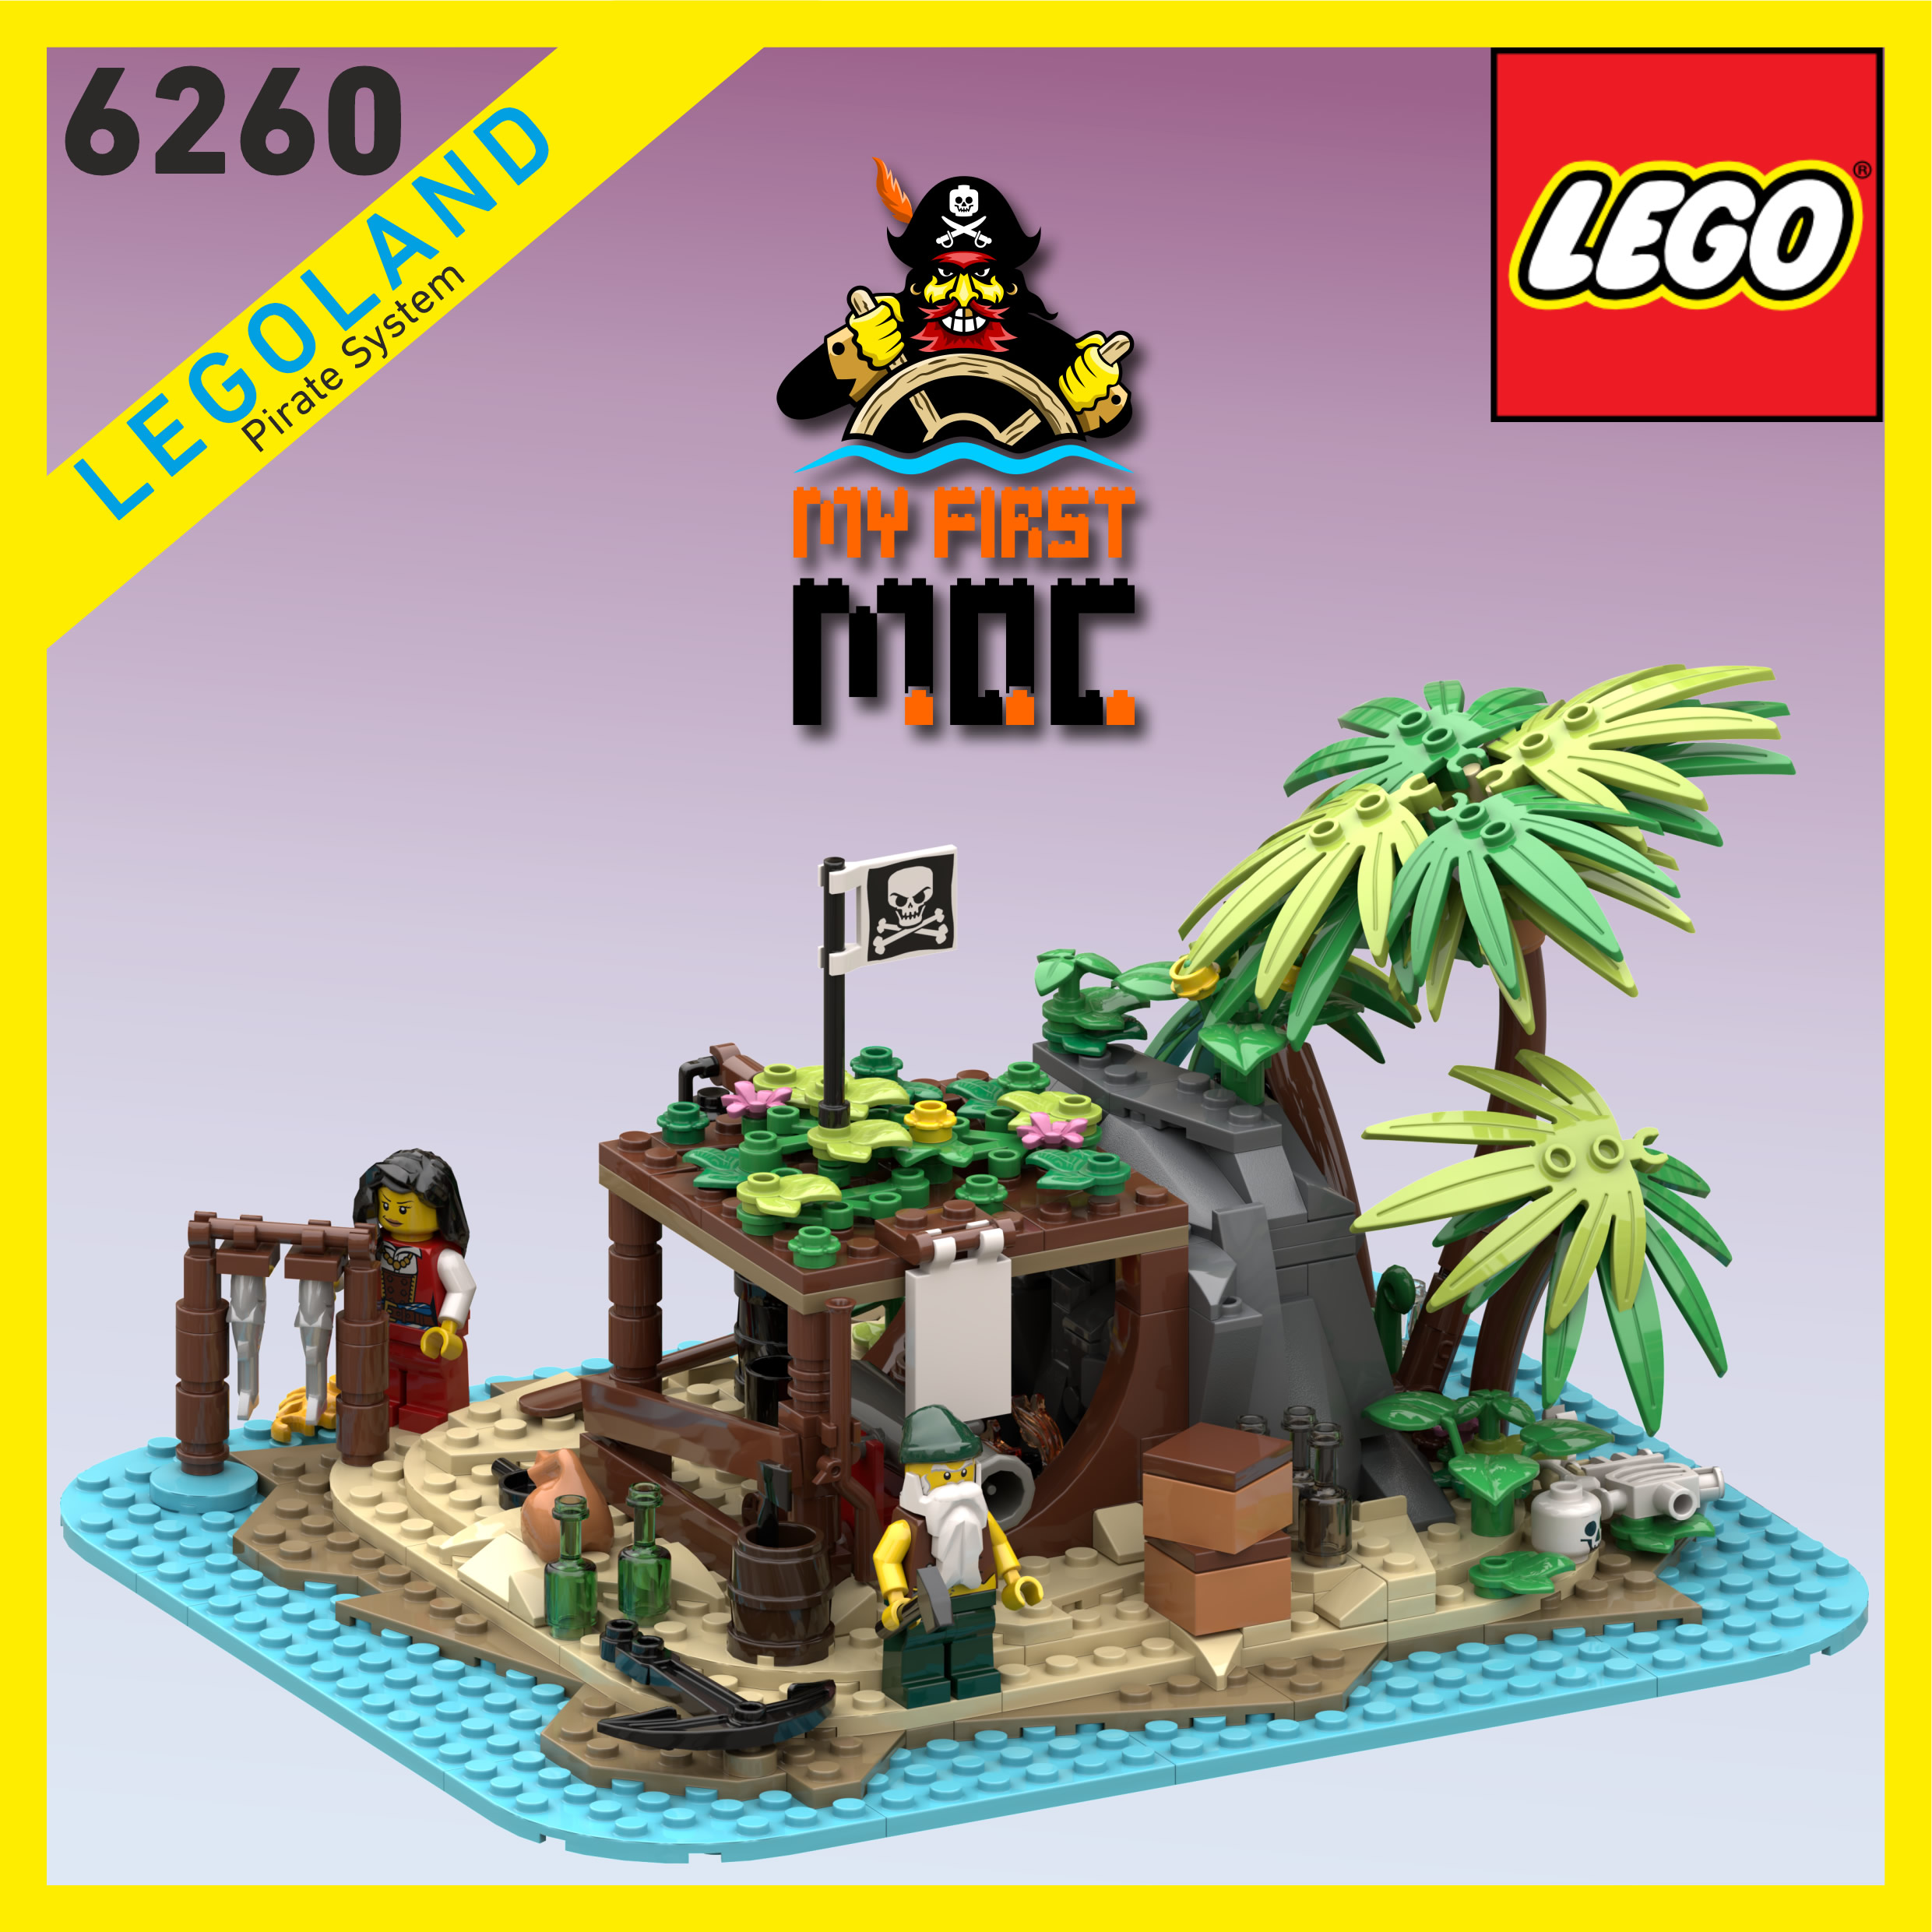 6260 Shipwreck Island Remake” by MOCs – Pirate and MOCs